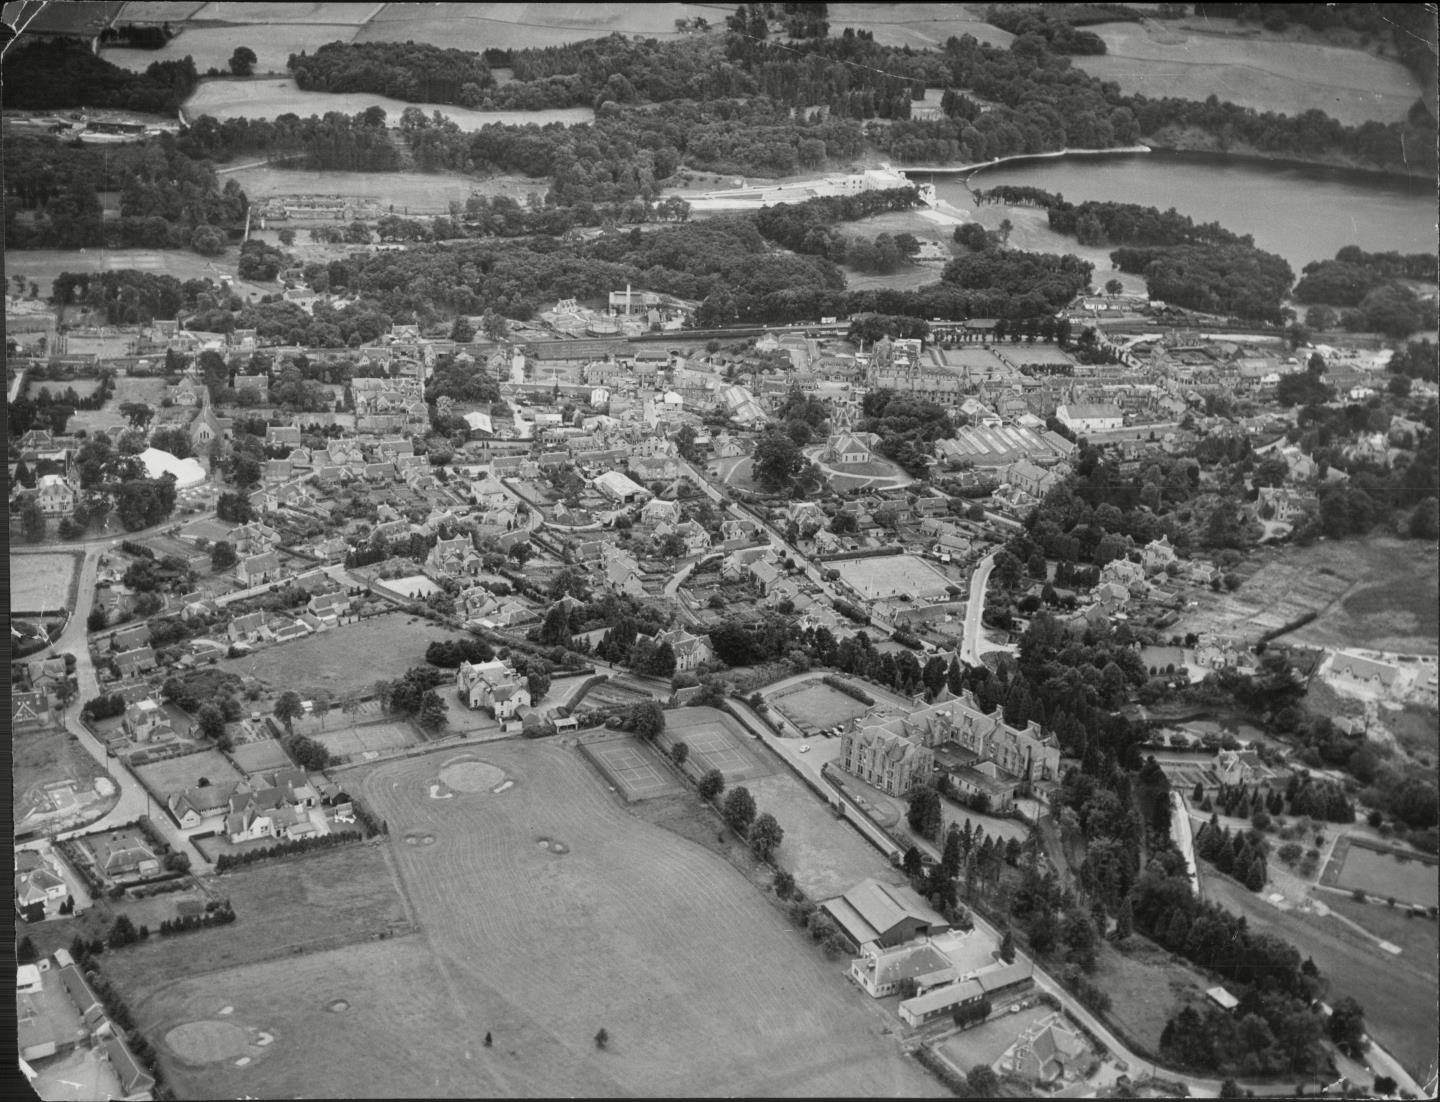 An aerial view of Pitlochry